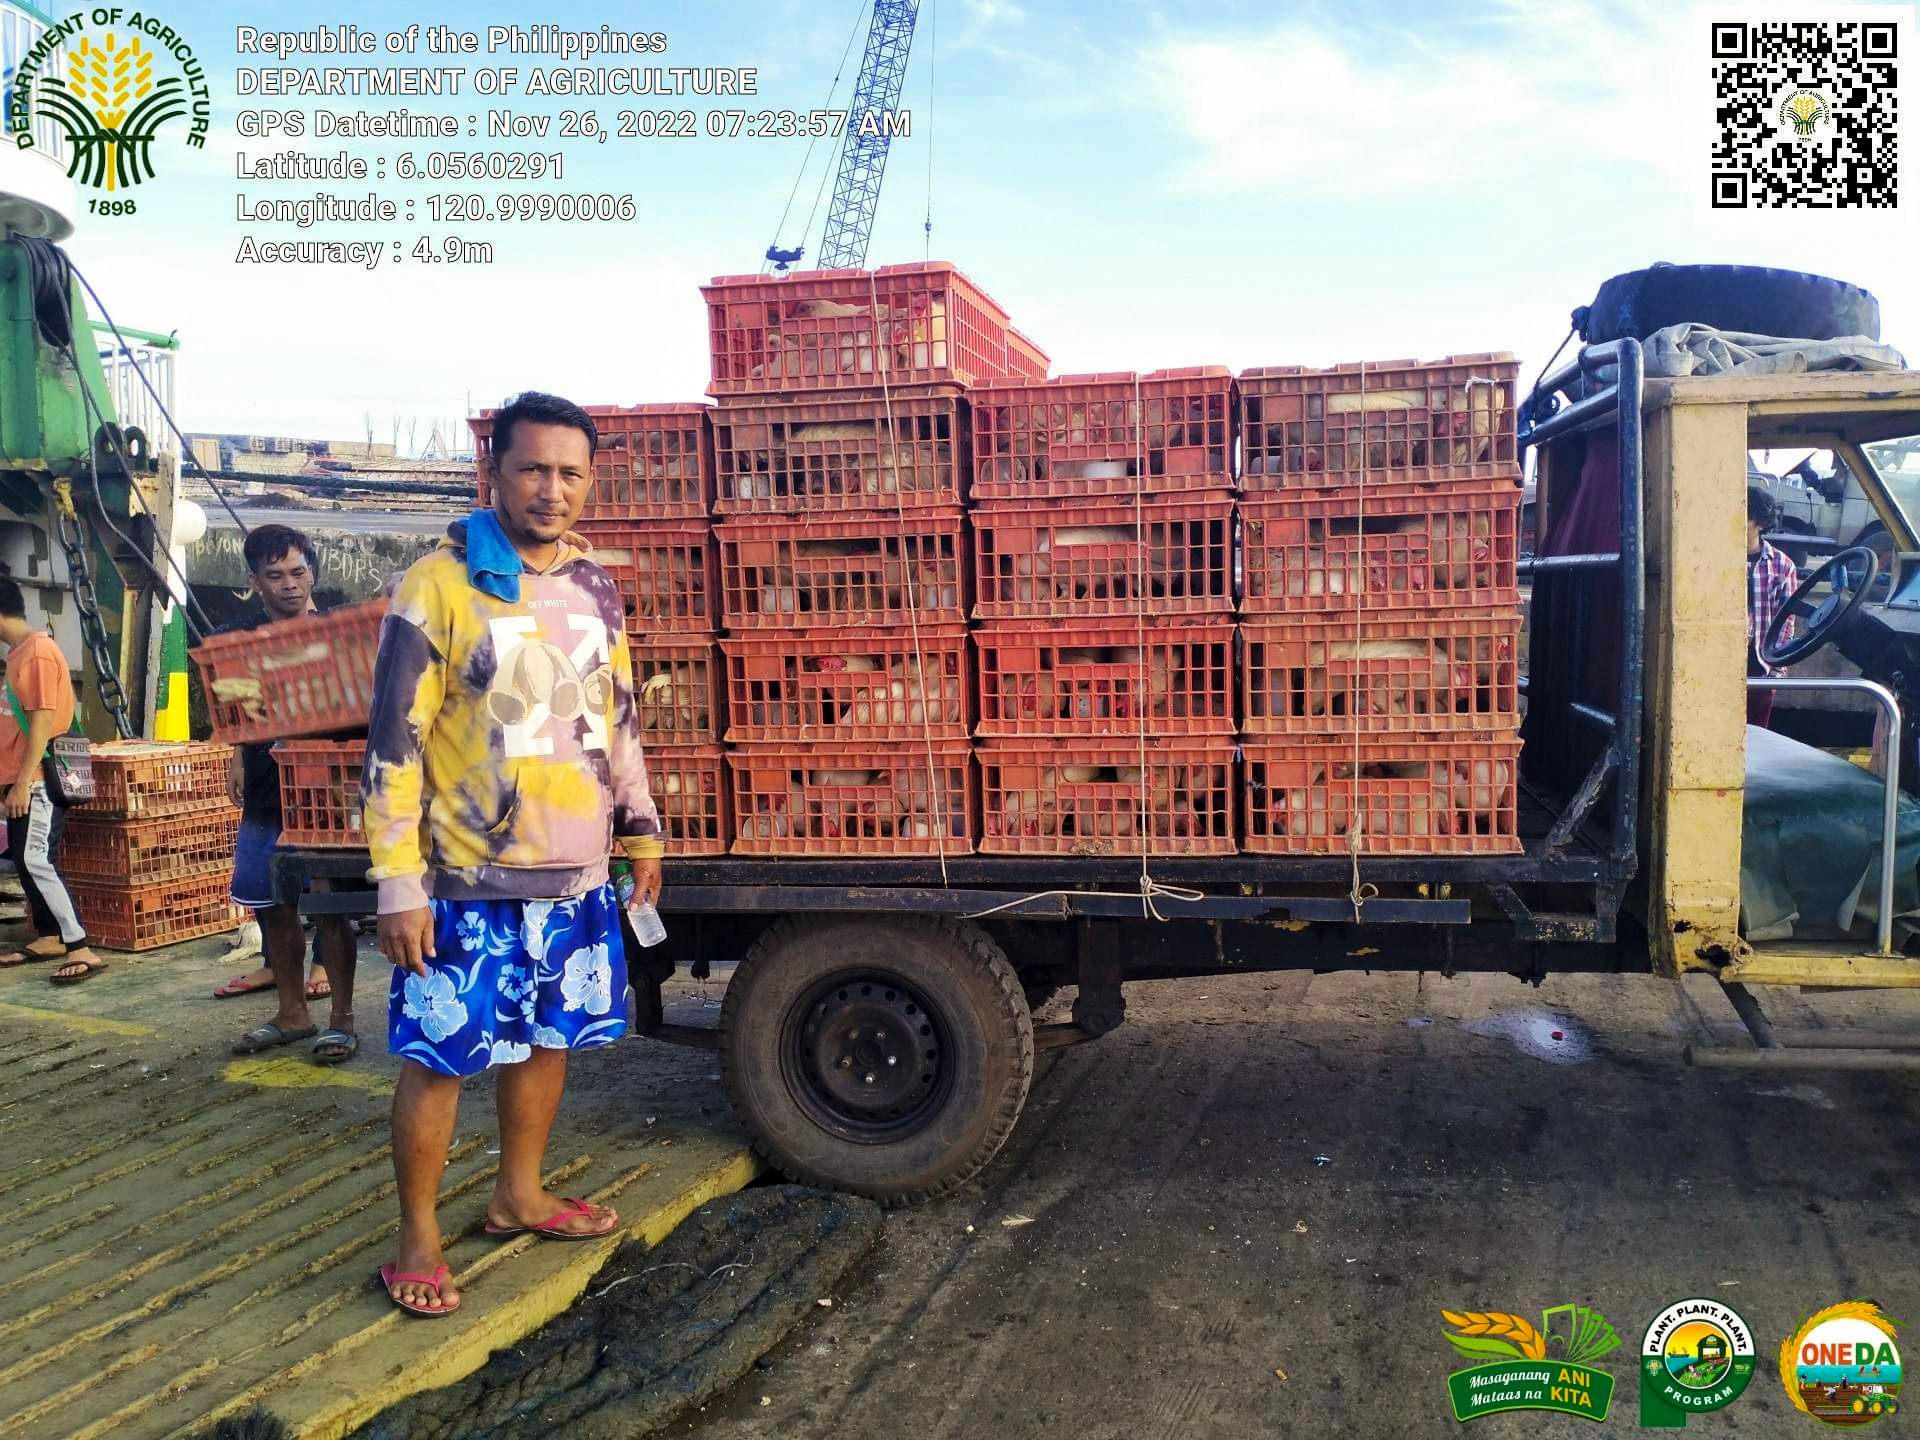 11 Sulu FAs receive additional poultry support from SAAD Region 9